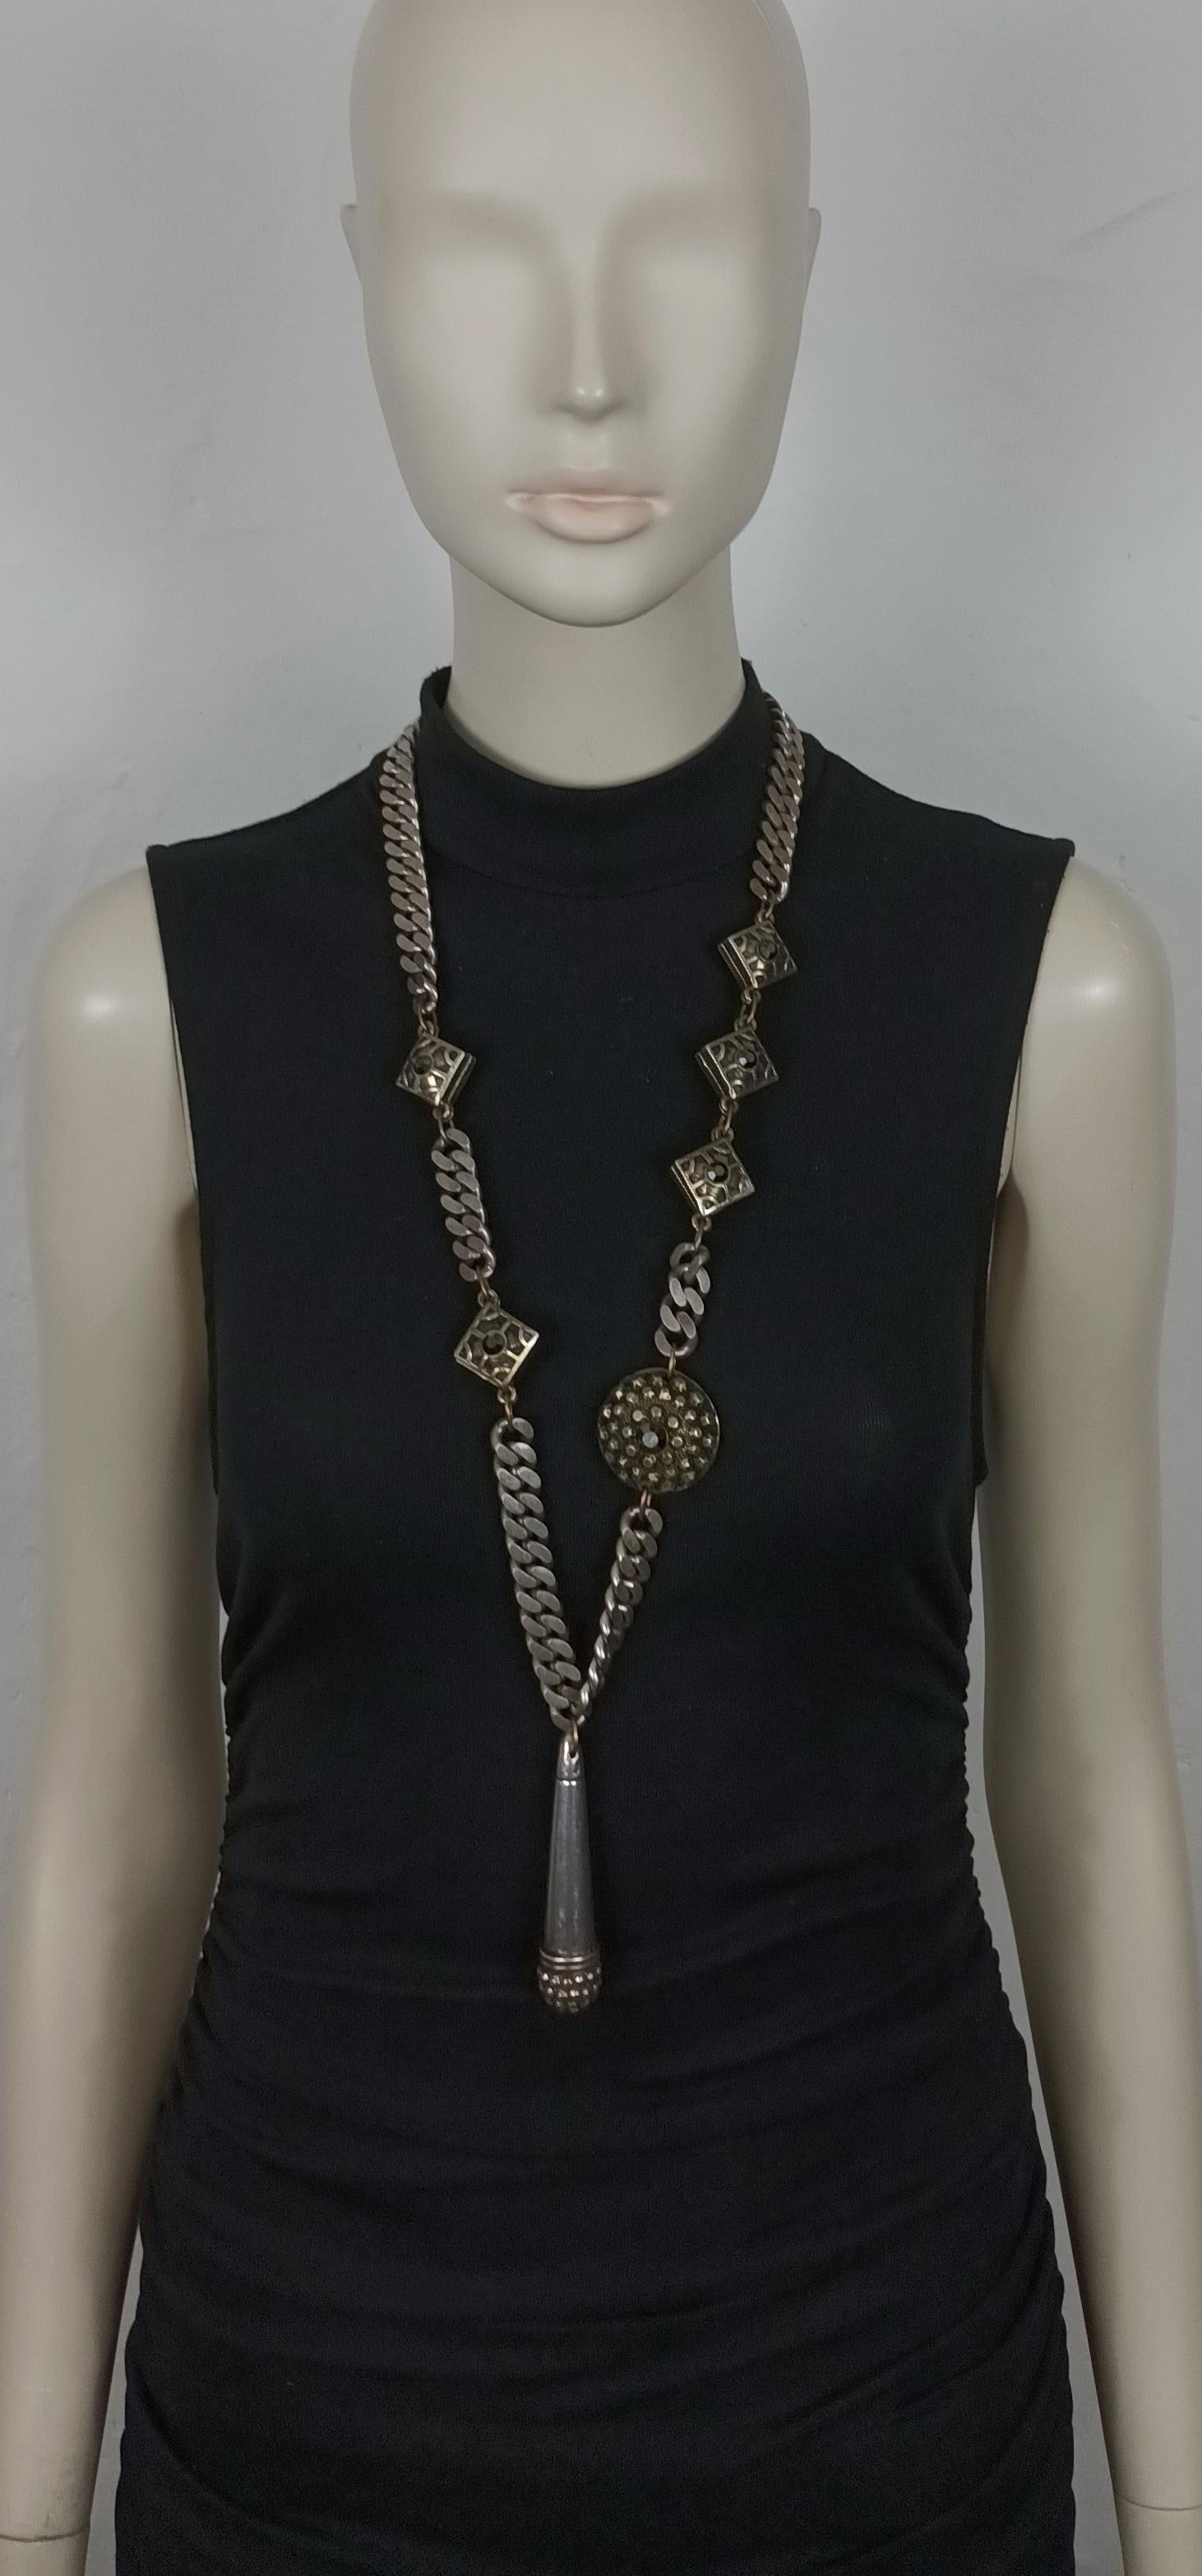 JEAN PAUL GAULTIER vintage antiqued silver tone chunky chain necklace featuring a resin ethnic disc, square links and a tubular drop pendant. Black crystal embellishment.

Slips on (no closure system).

Embossed JPG.

Indicative measurements :